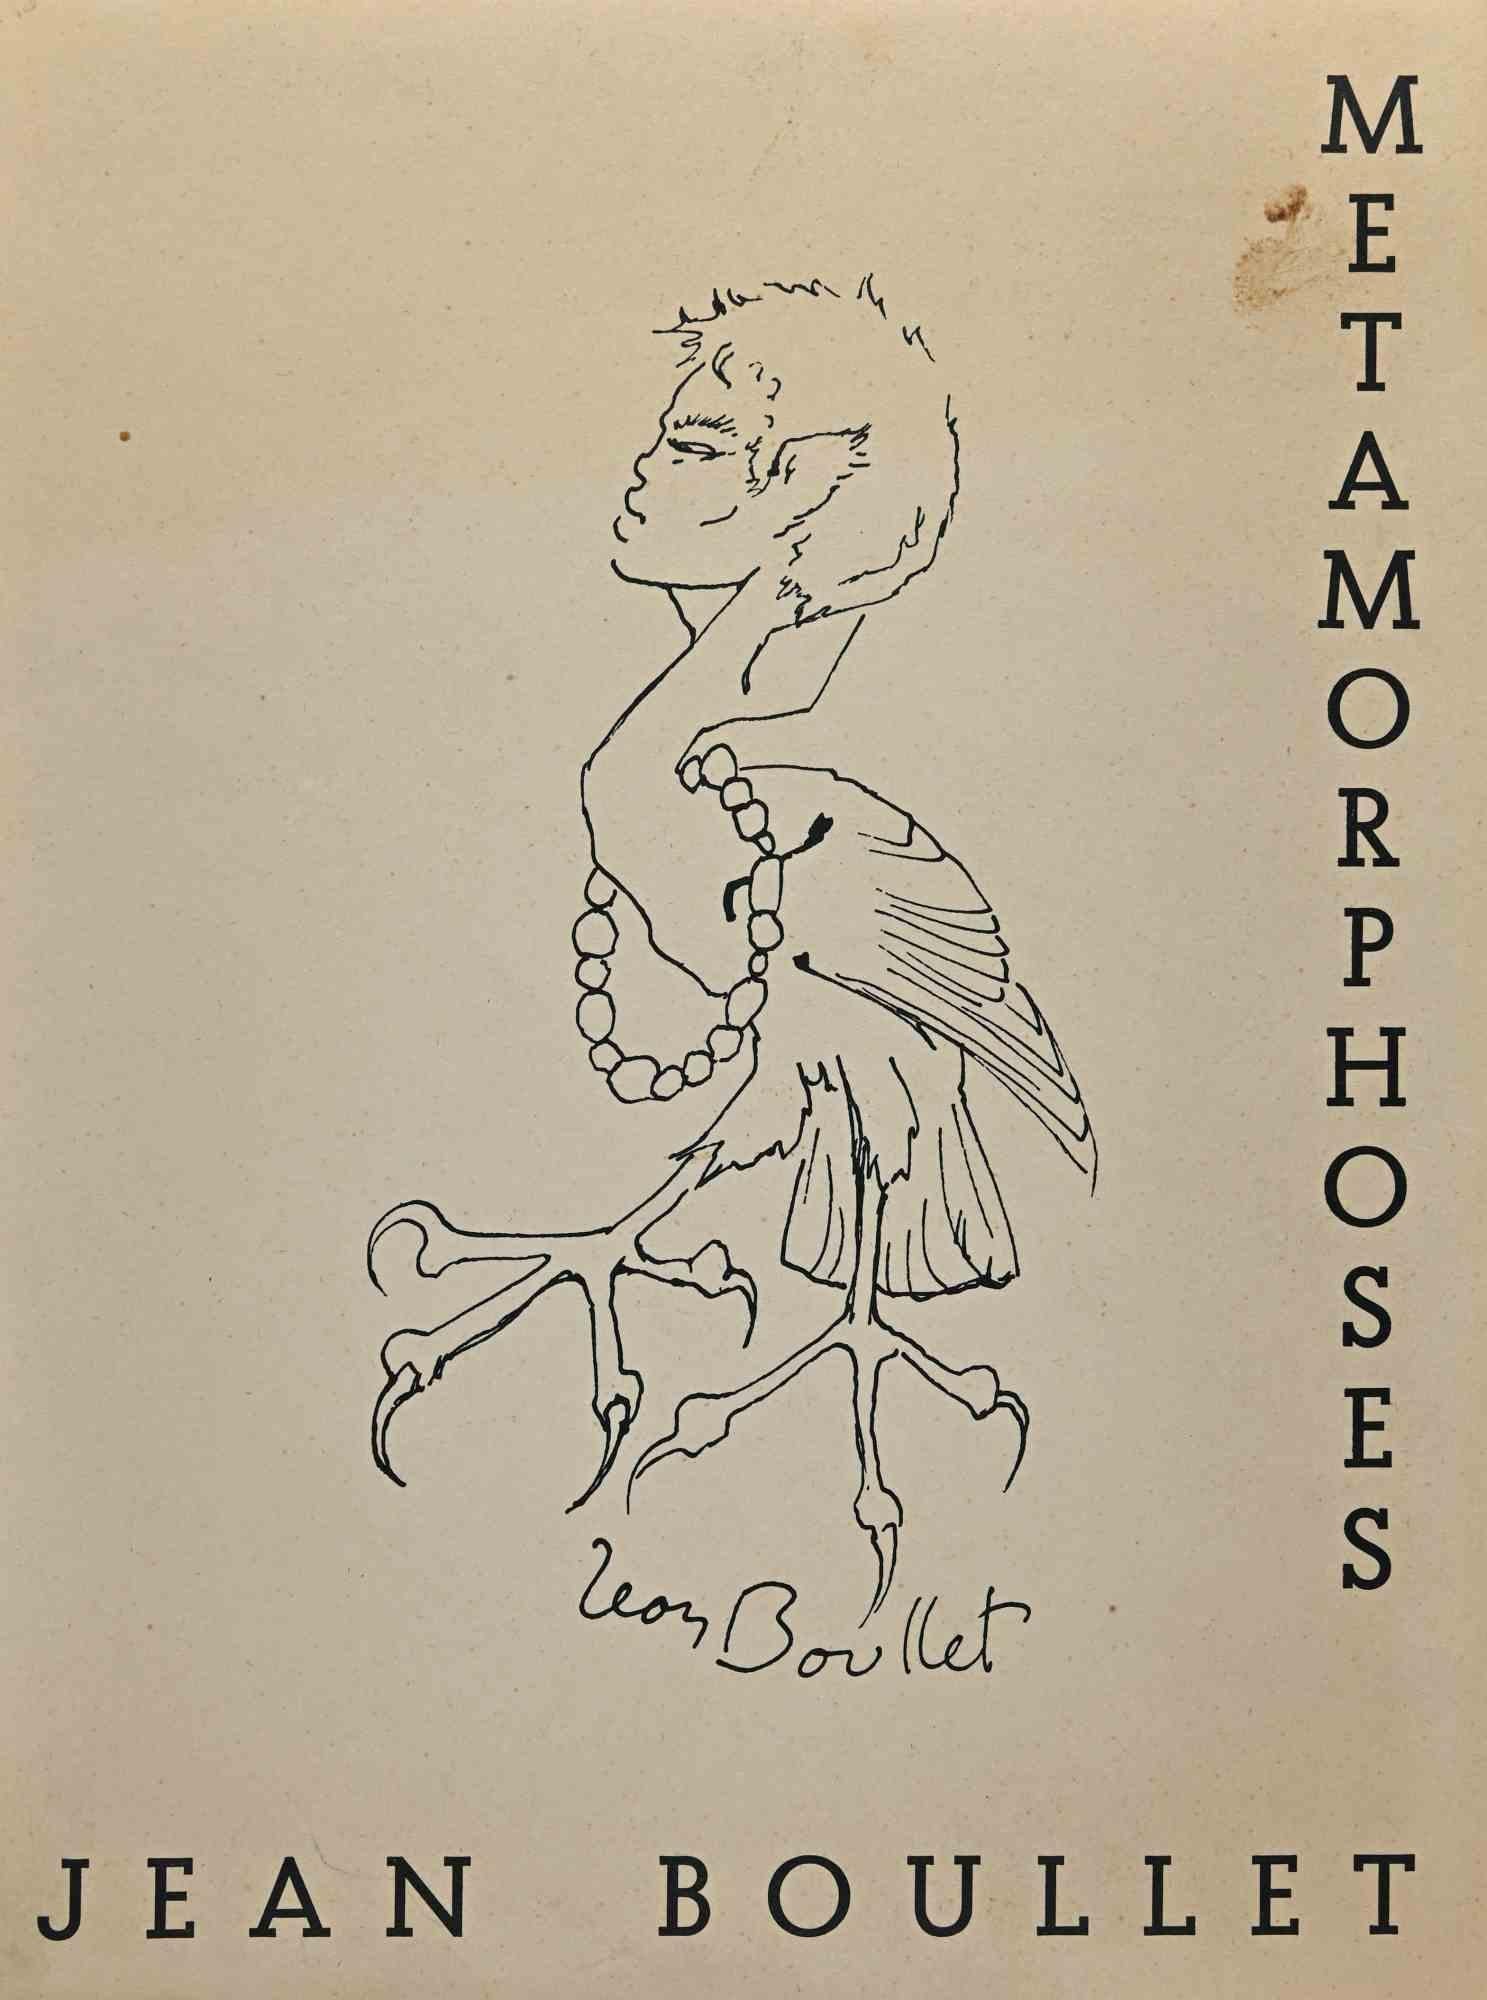  Metamorphosis - Lithograph by Jaen Boullet - 1950s